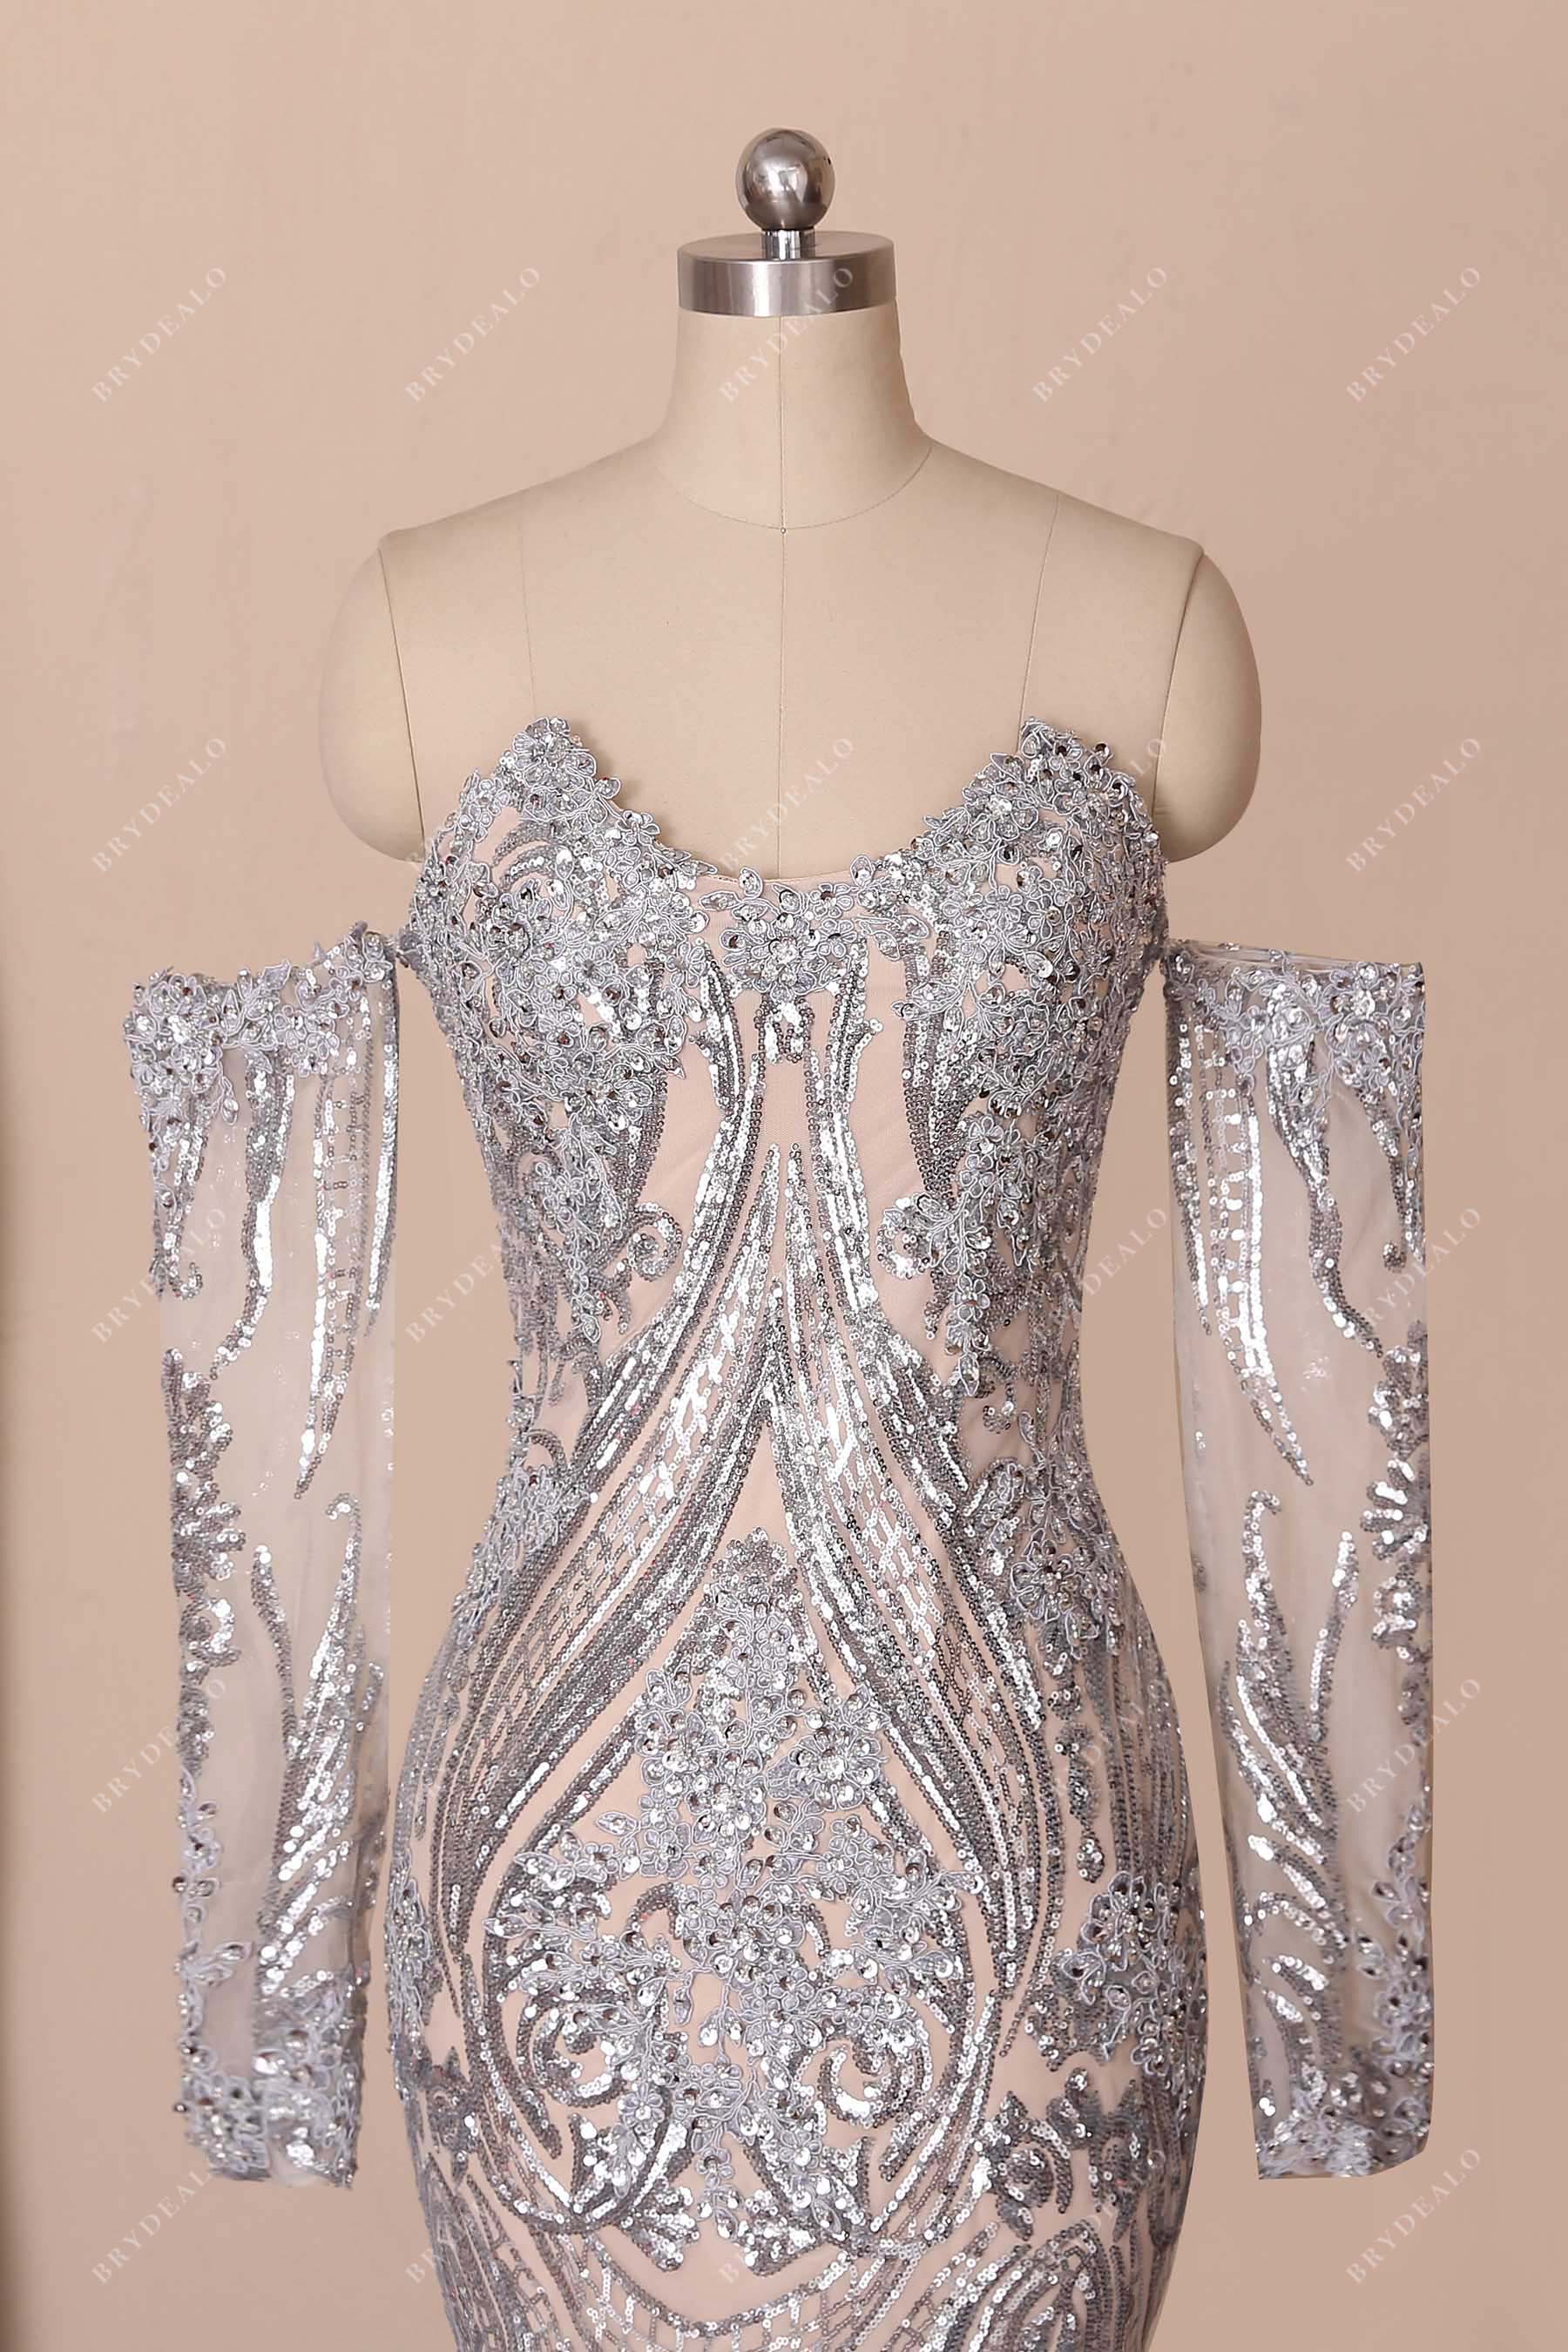 sparkly sequin patterned prom dress